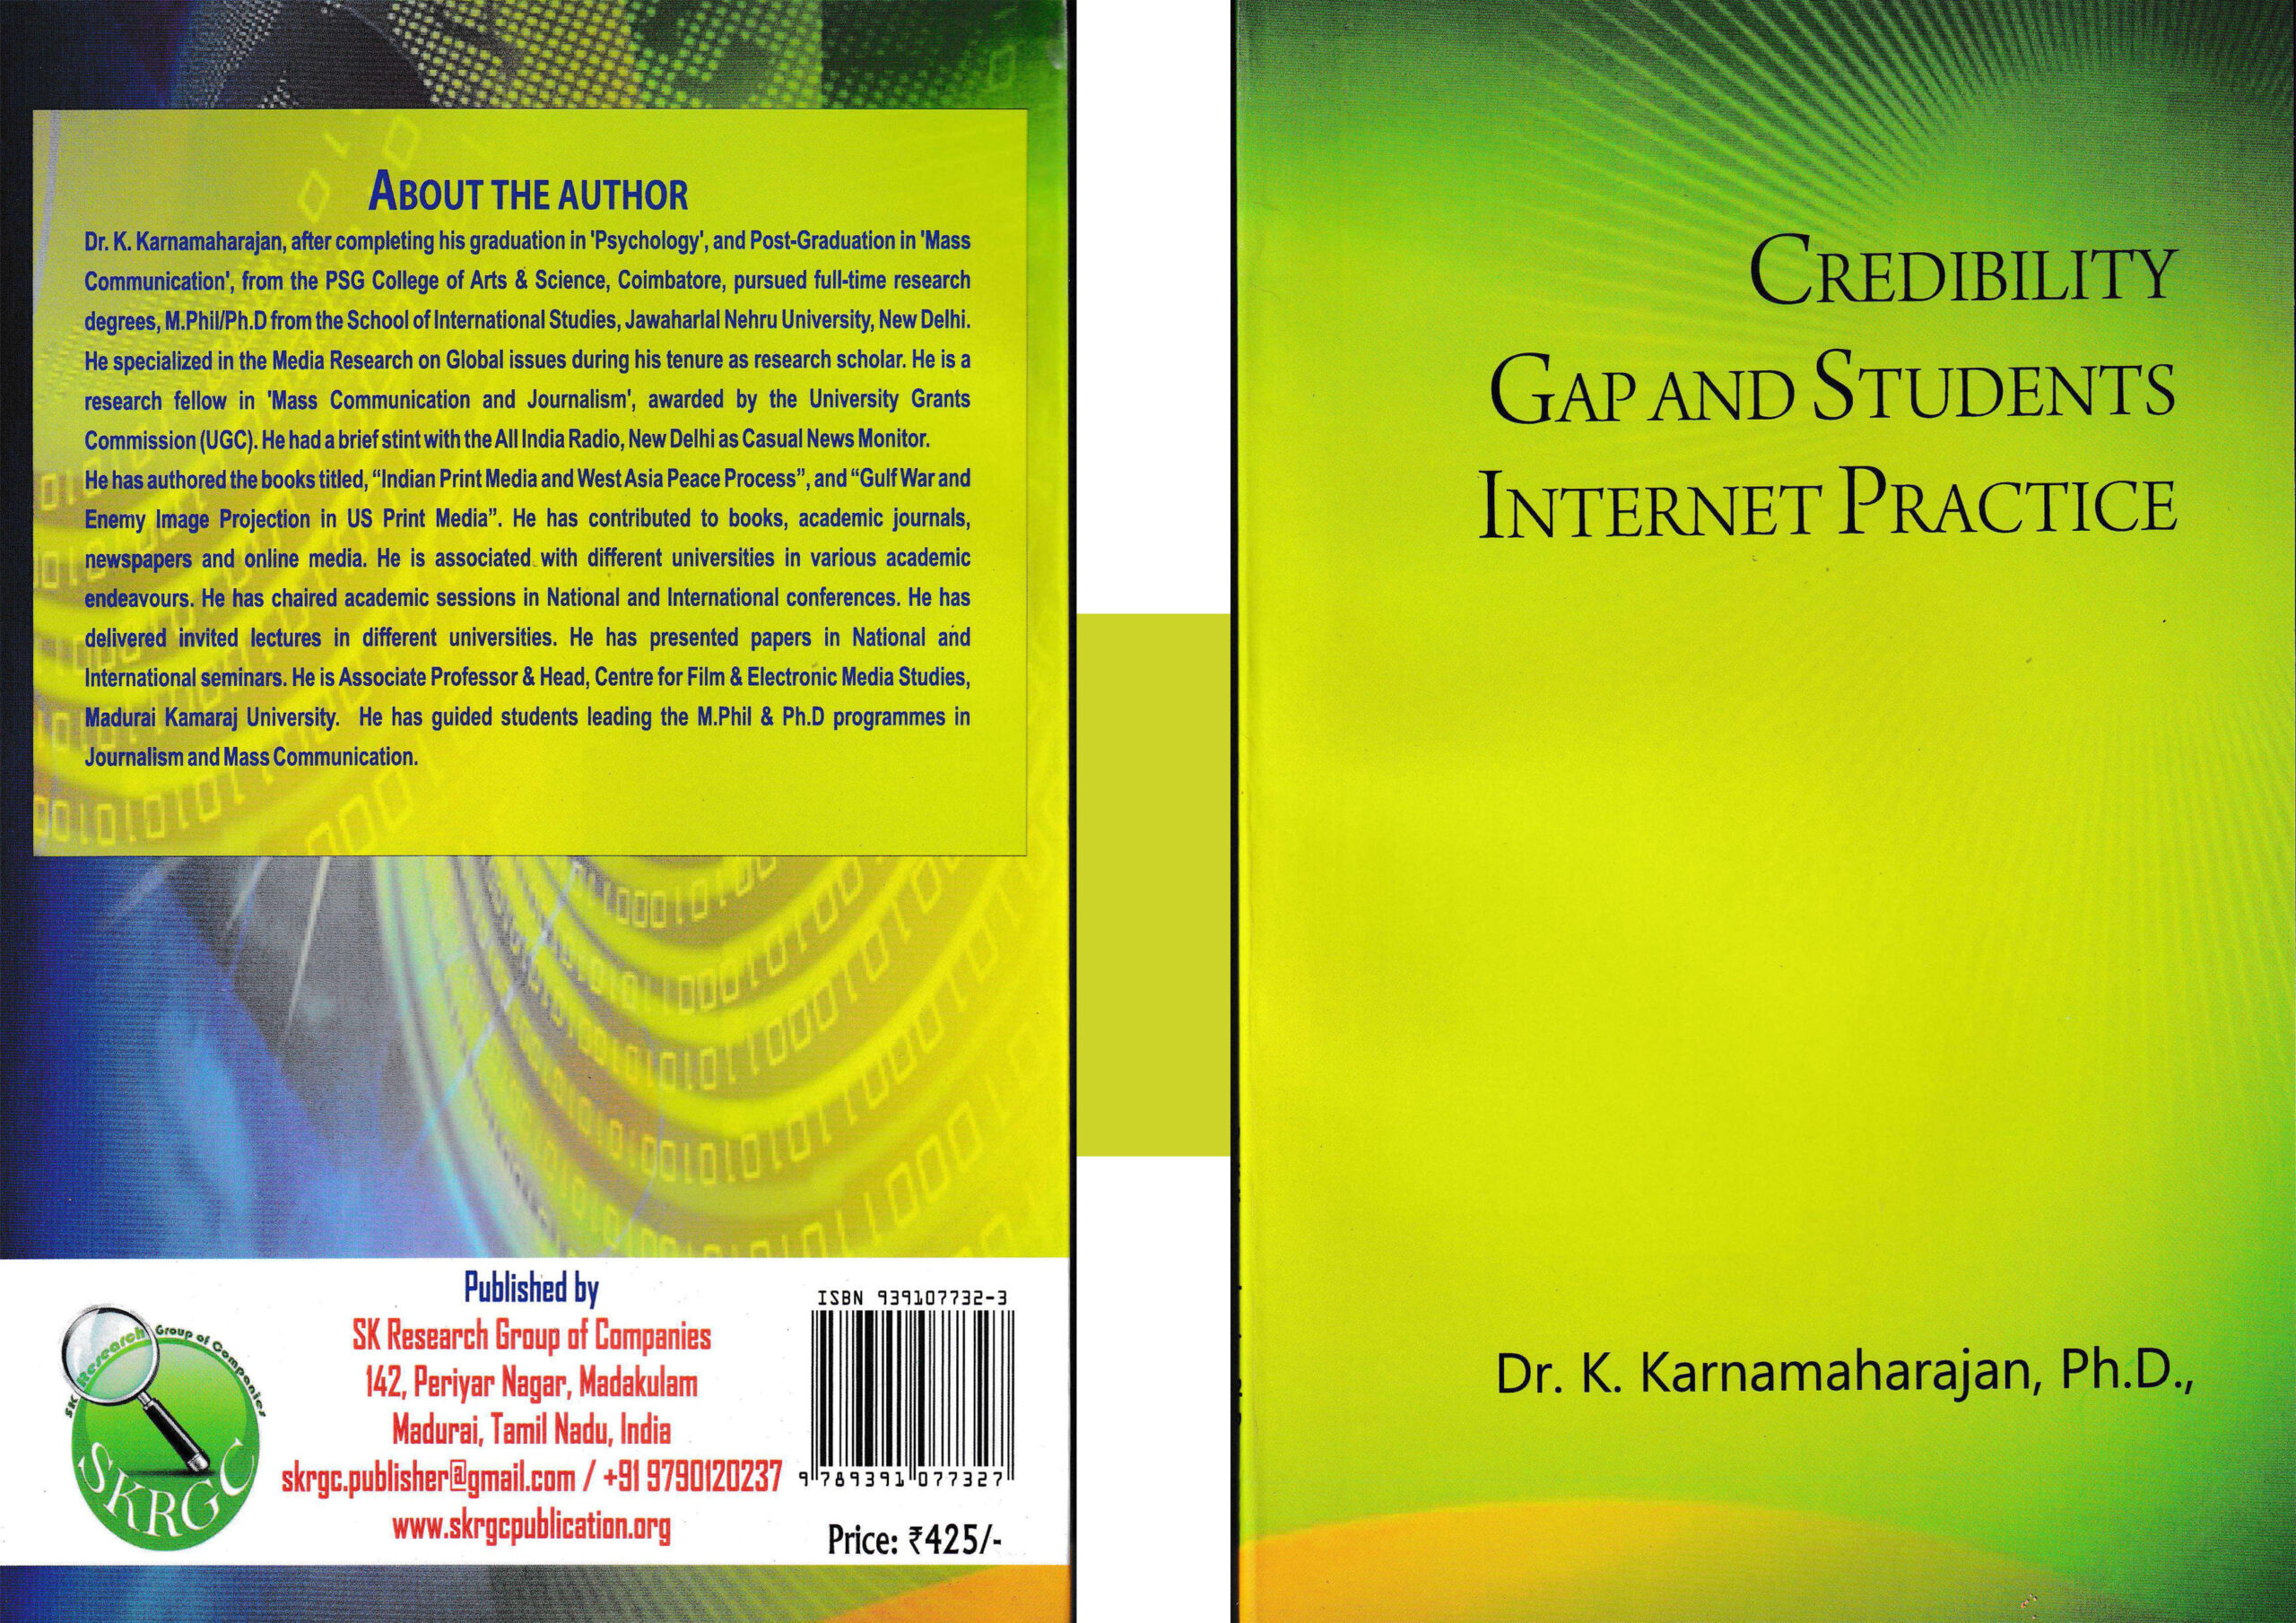 CREDIBILITY GAP AND STUDENTS INTERNET PRACTICE